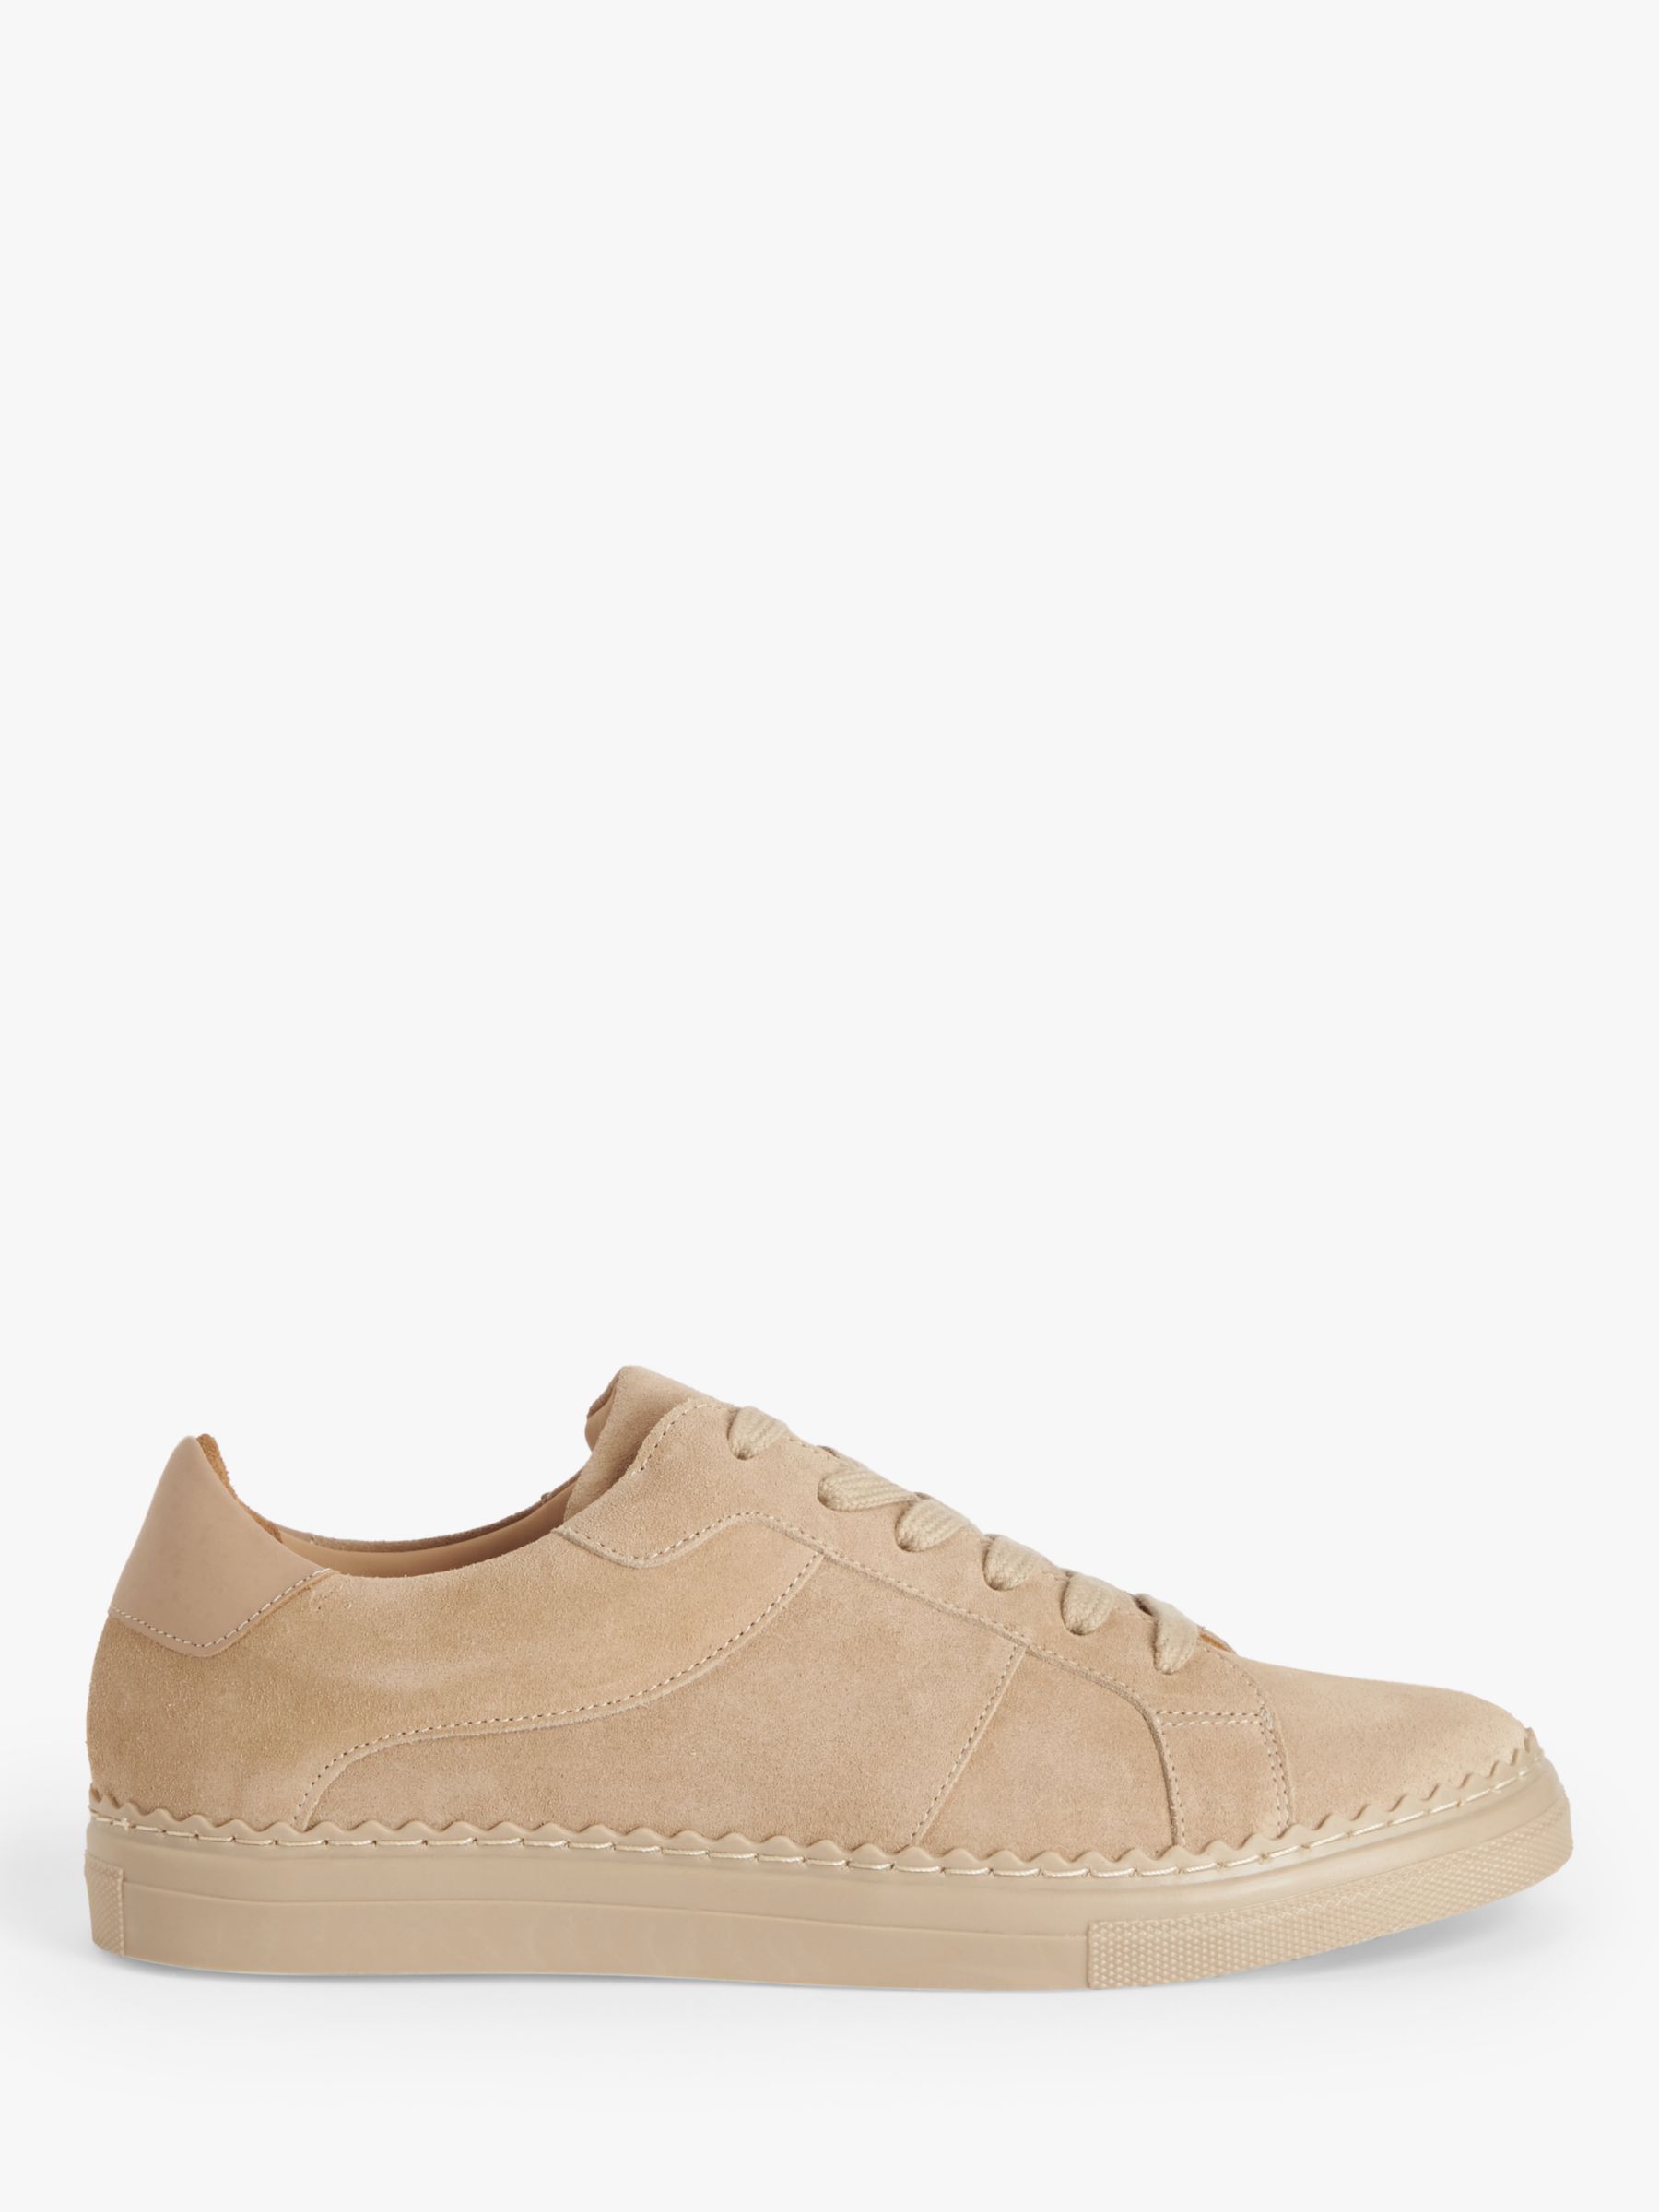 John Lewis Freya Suede Lace Up Trainers, Nude at John Lewis & Partners